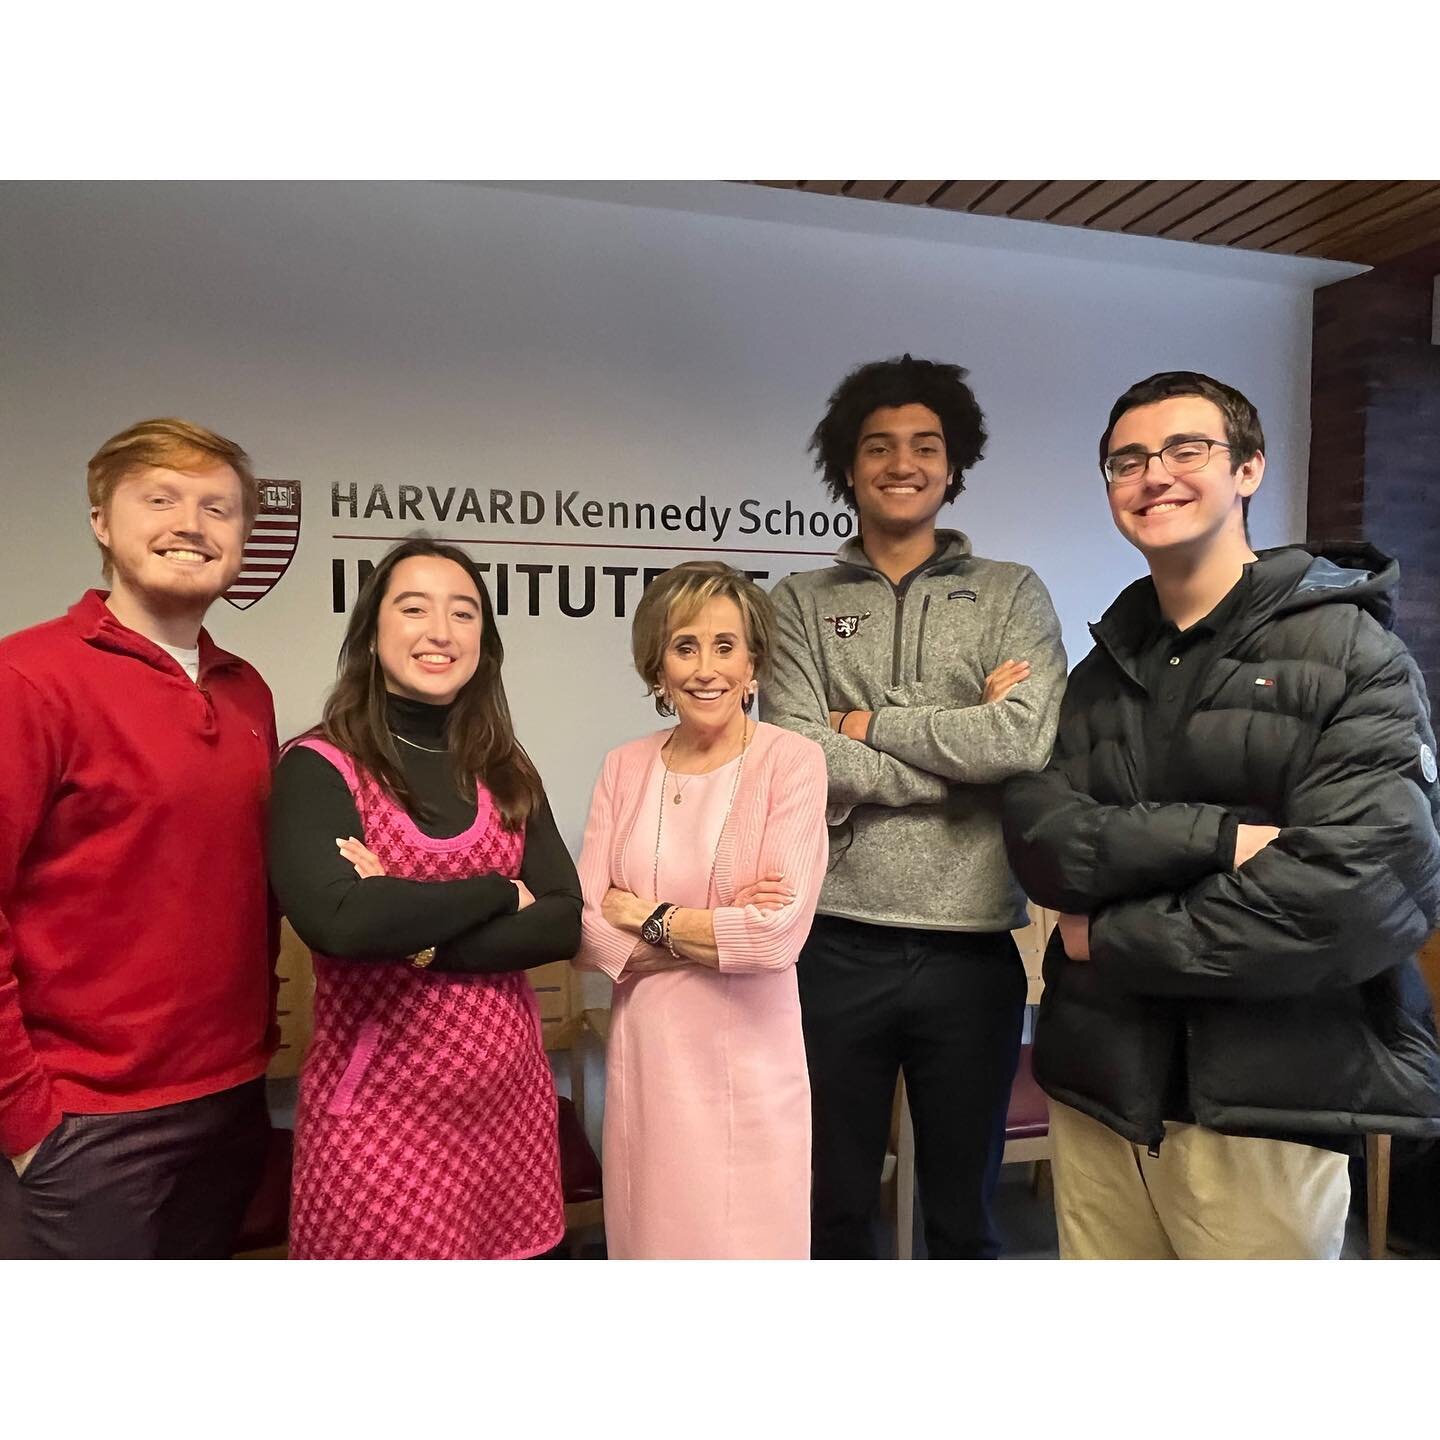 We were honored and thrilled to welcome Valerie Biden Owens, President Biden&rsquo;s sister, former campaign manager, and longtime advisor, to campus today. She was delightful and left us with many wise and inspiring words.